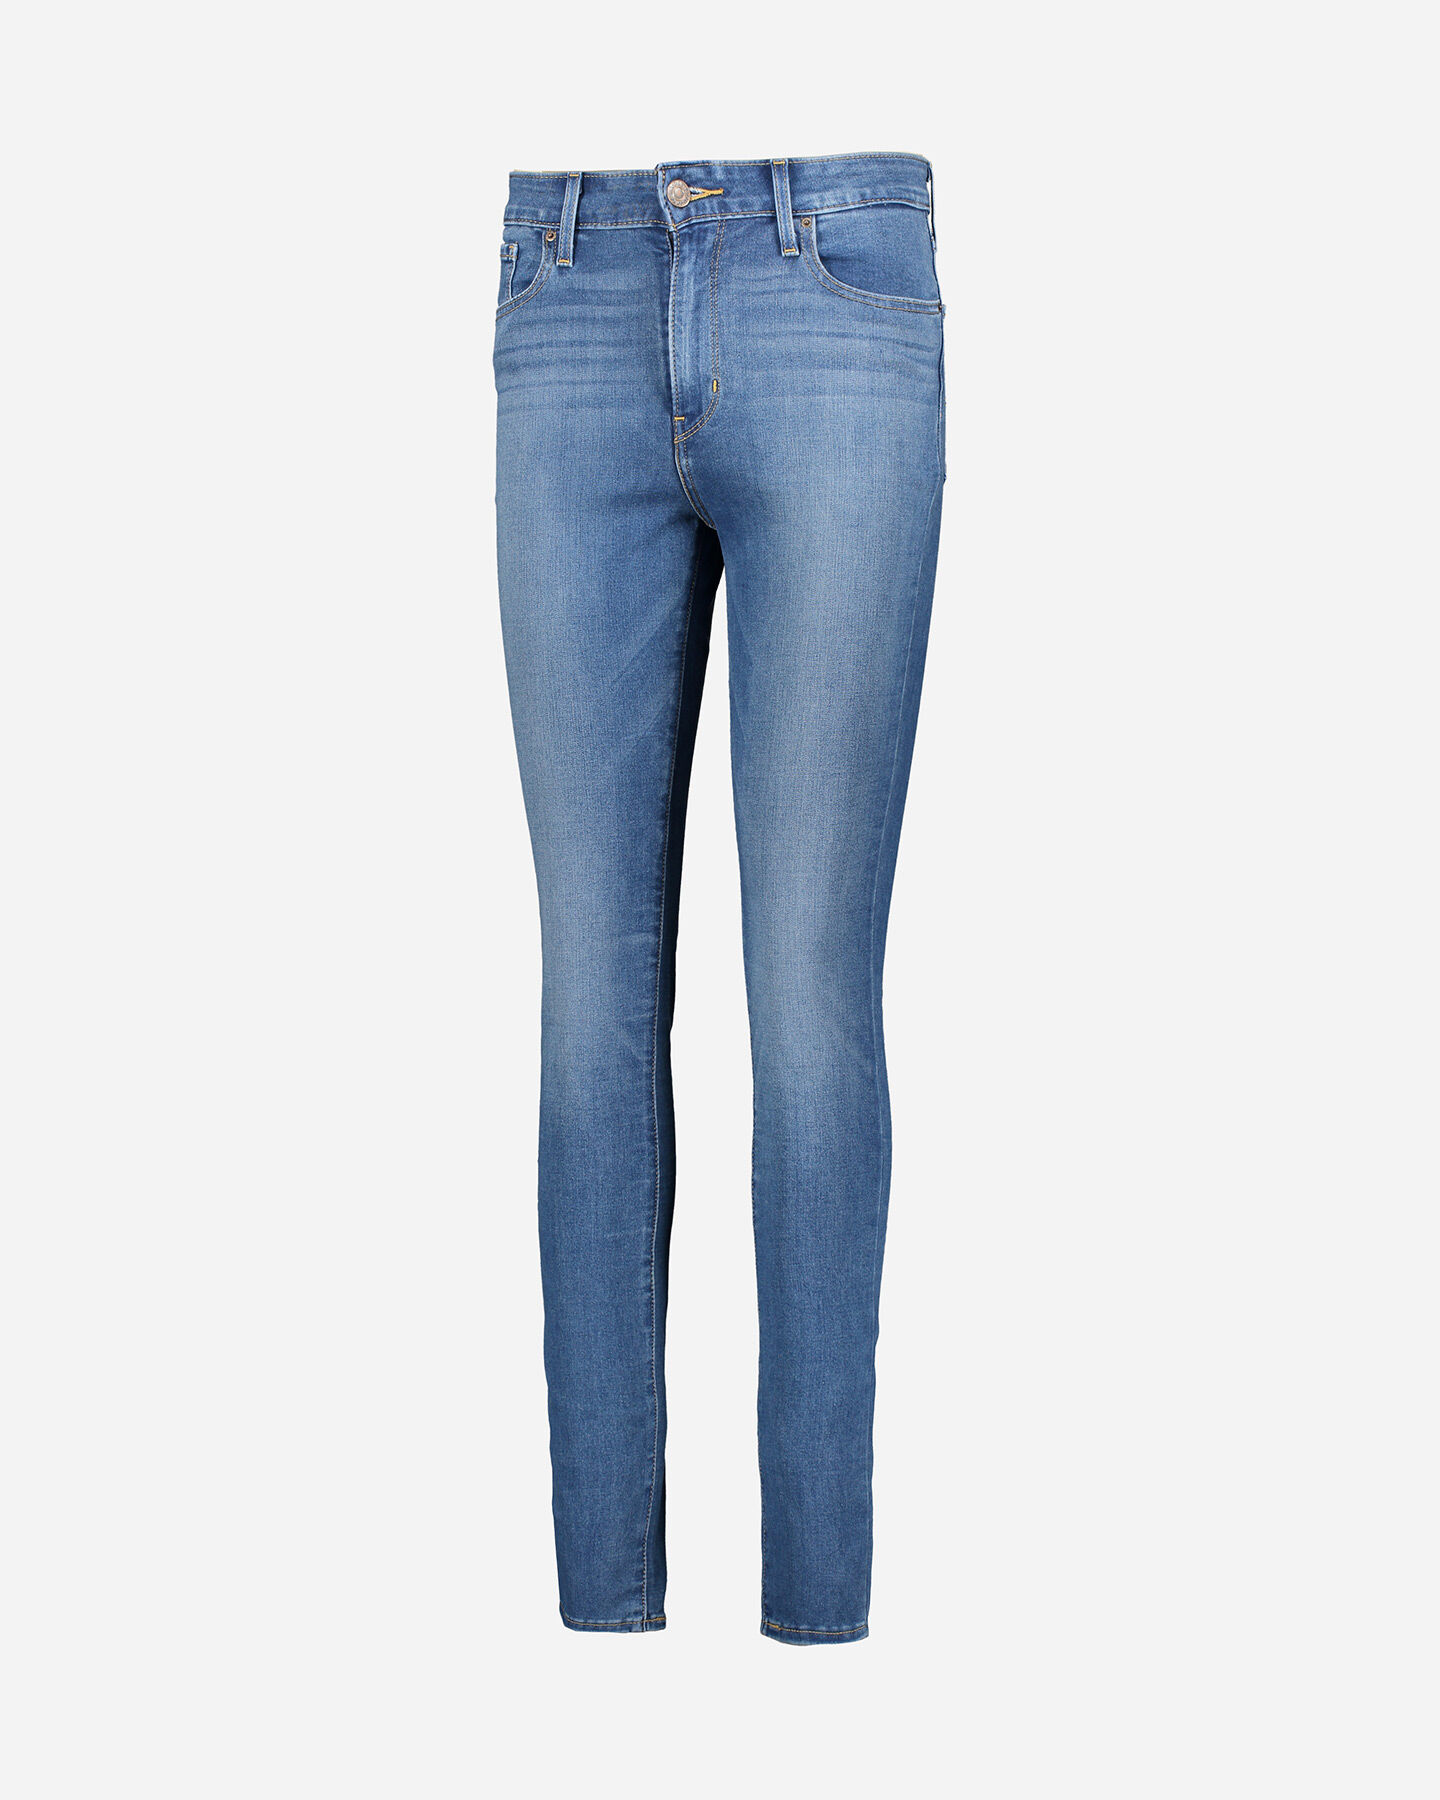  Jeans LEVI'S 721 HIGH RISE SKINNY W S4077782|0293|26 scatto 4